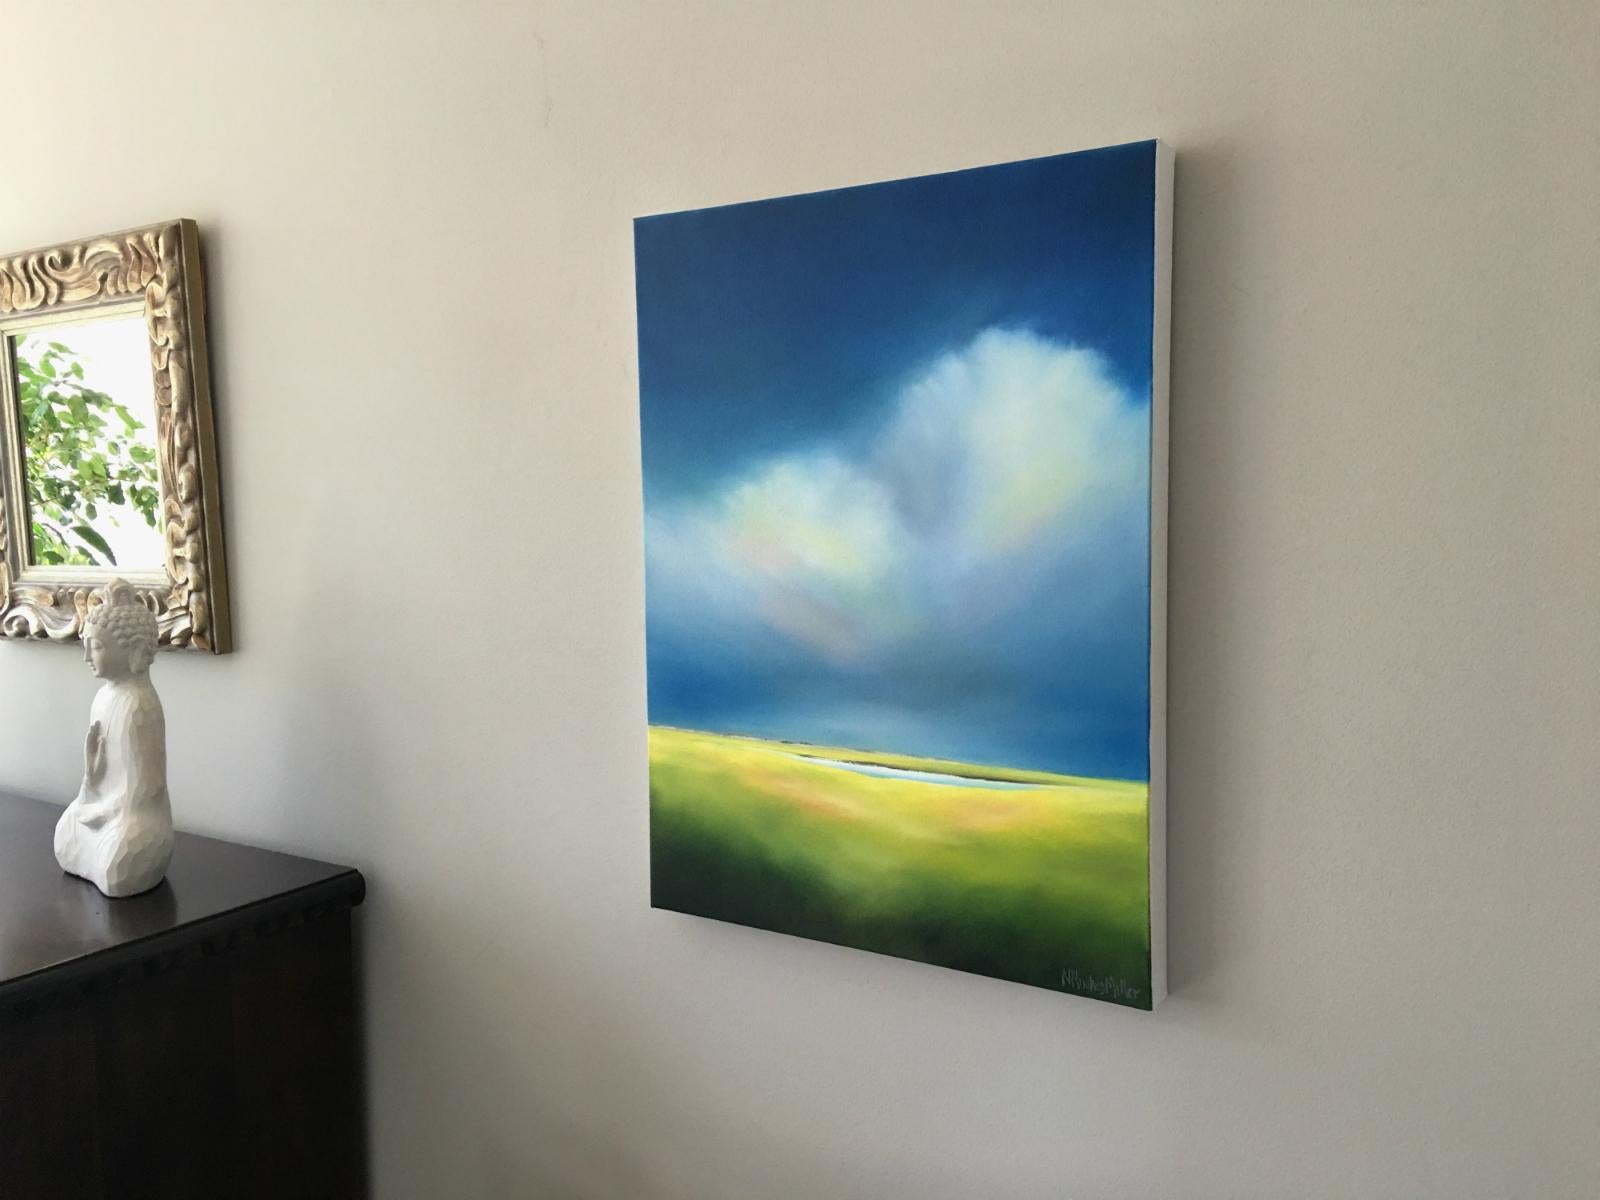 <p>Artist Comments<br>Above the marsh a wondrous cloud in hazy light appears on the horizon. I use a simple palette of blue and green to convey this coastal landscape.</p><p>About the Artist<br>Reflected in Nancy Hughes Miller’s paintings are the